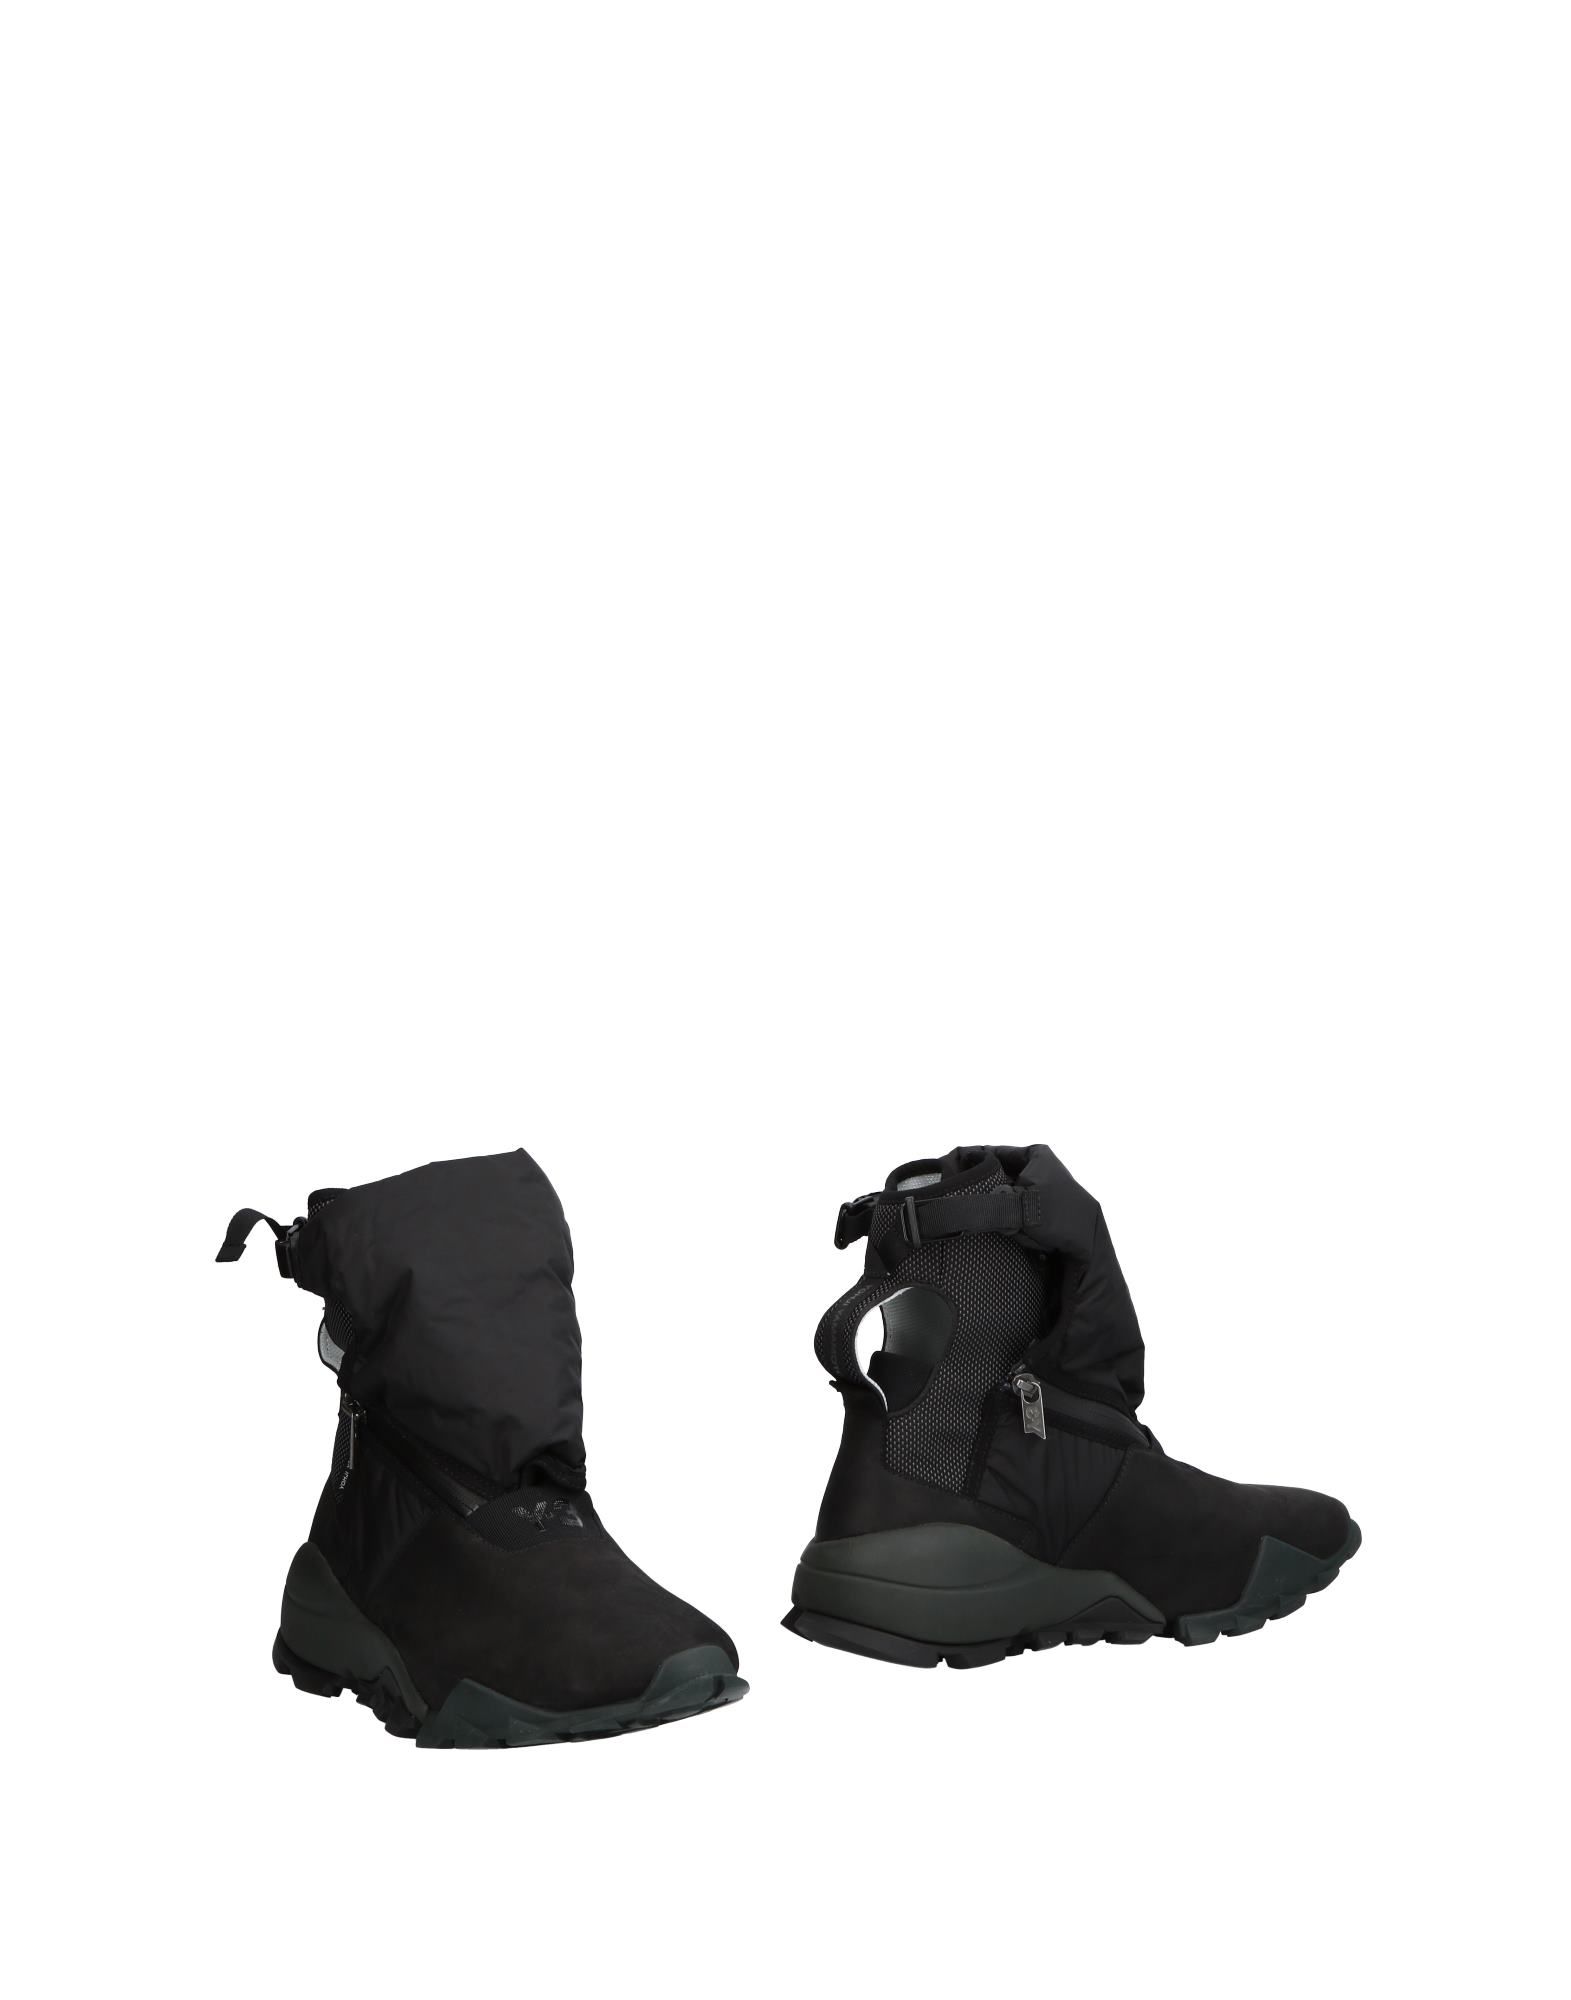 Y-3 BOOTS,11493565MV 11